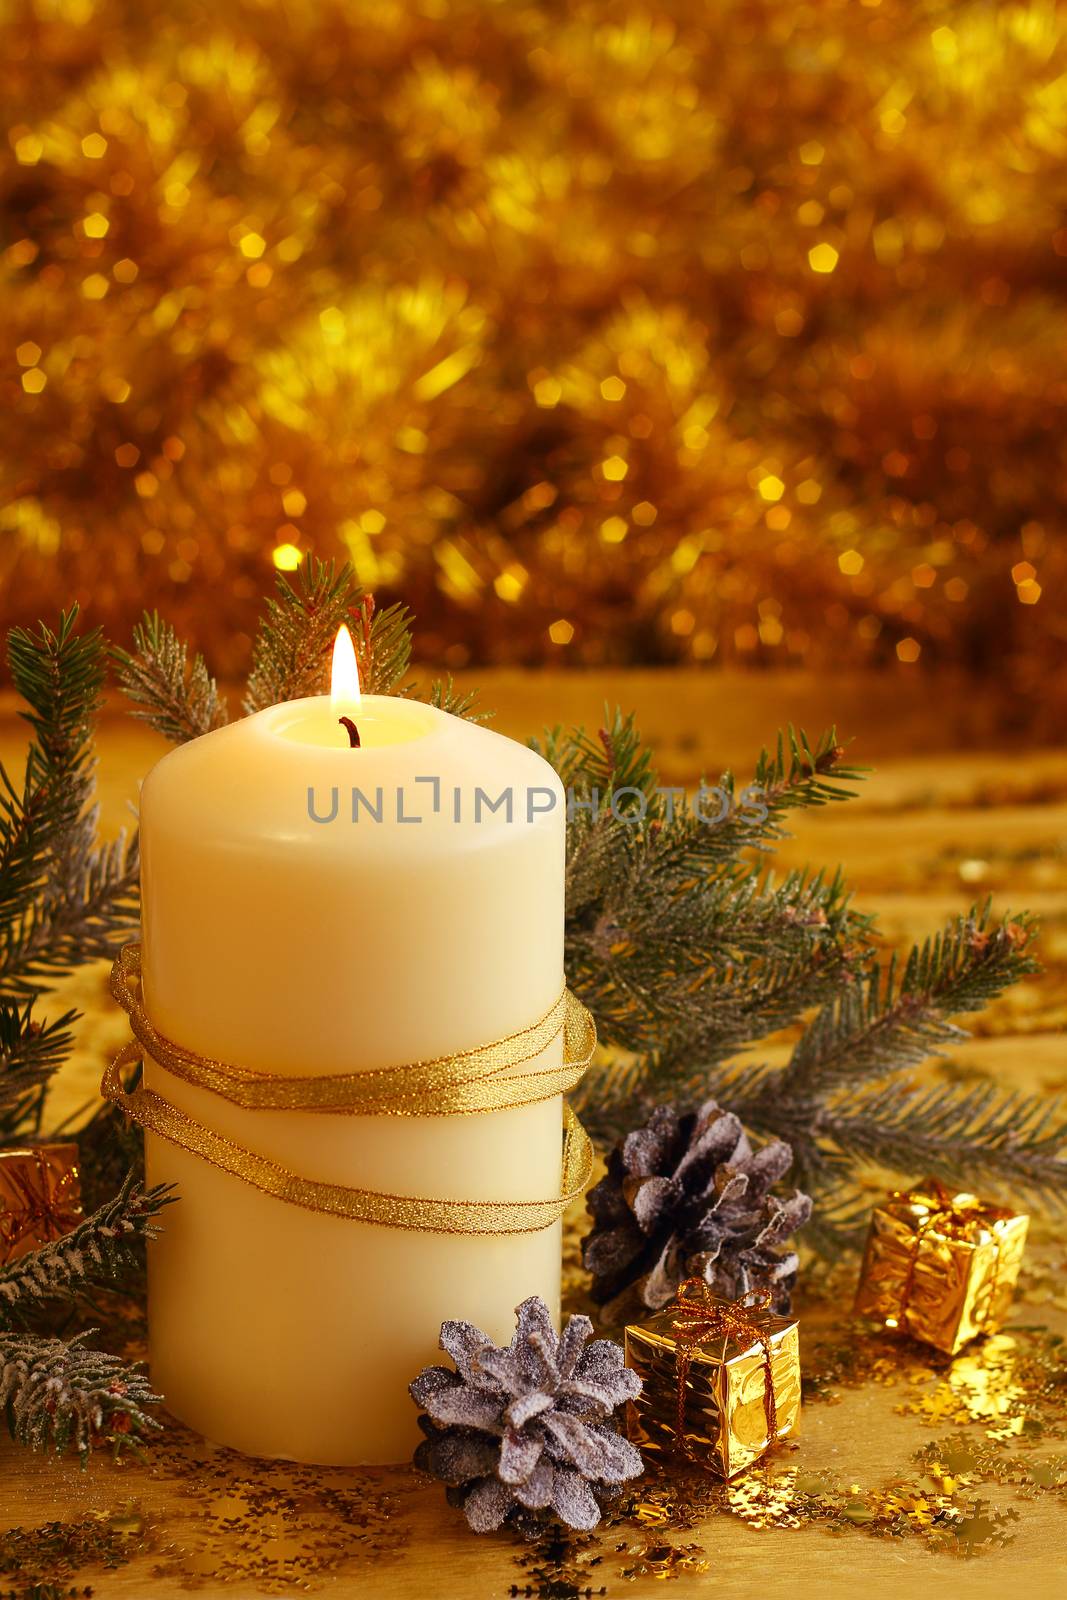 Christmas decorative burning candle, fir branch and decor over golden bokeh background